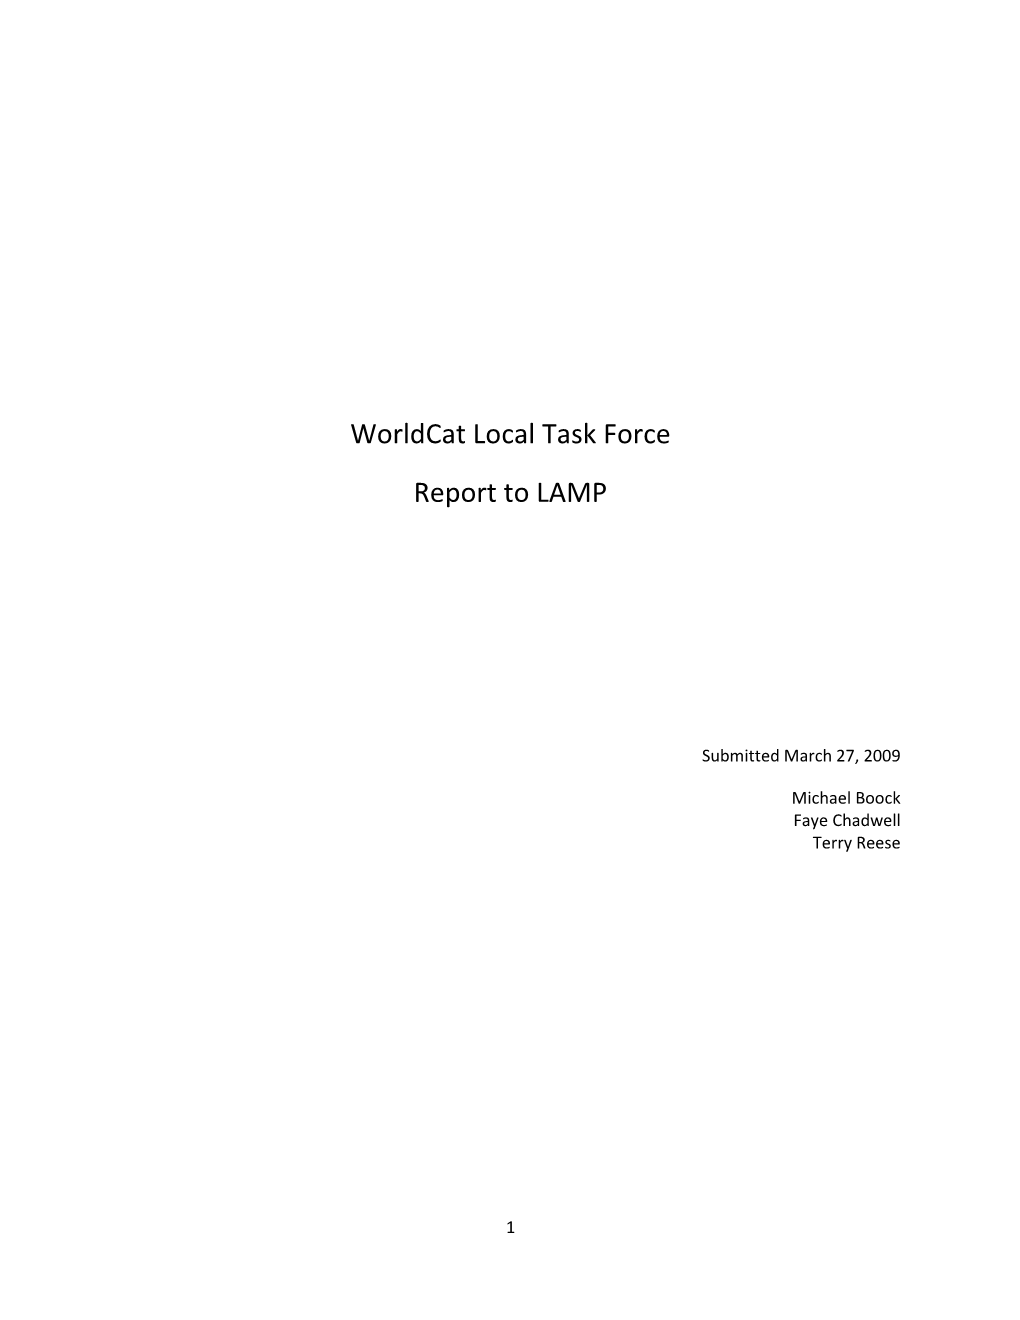 Worldcat Local Task Force Report to LAMP